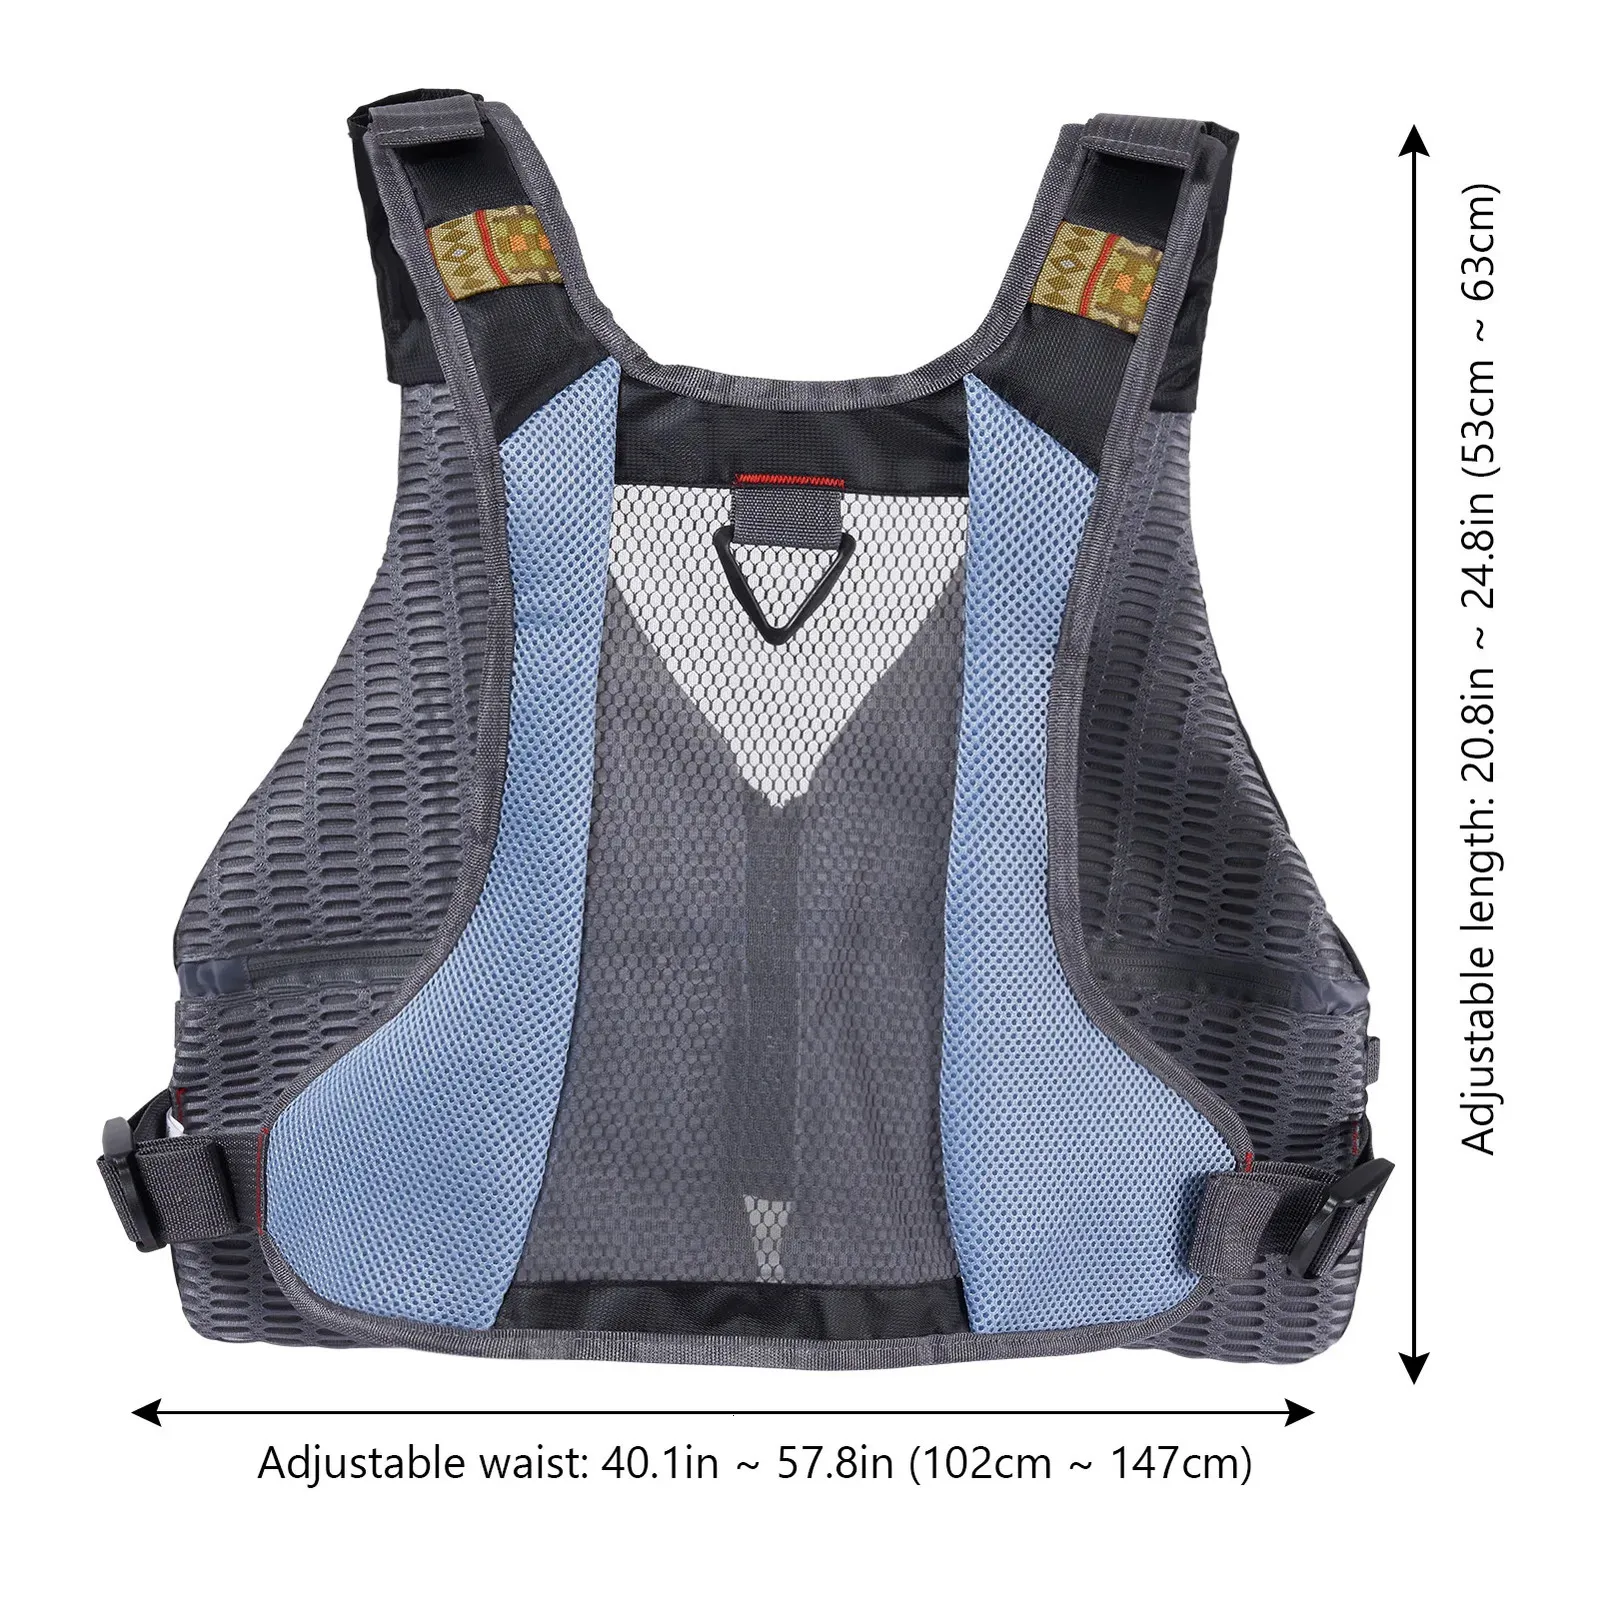 Life Vest Buoy BASSDASH Fly Fishing Vest With Pockets Adjustable Size For  Men Women Bass Trout Fishing FV12 231201 From You09, $20.24